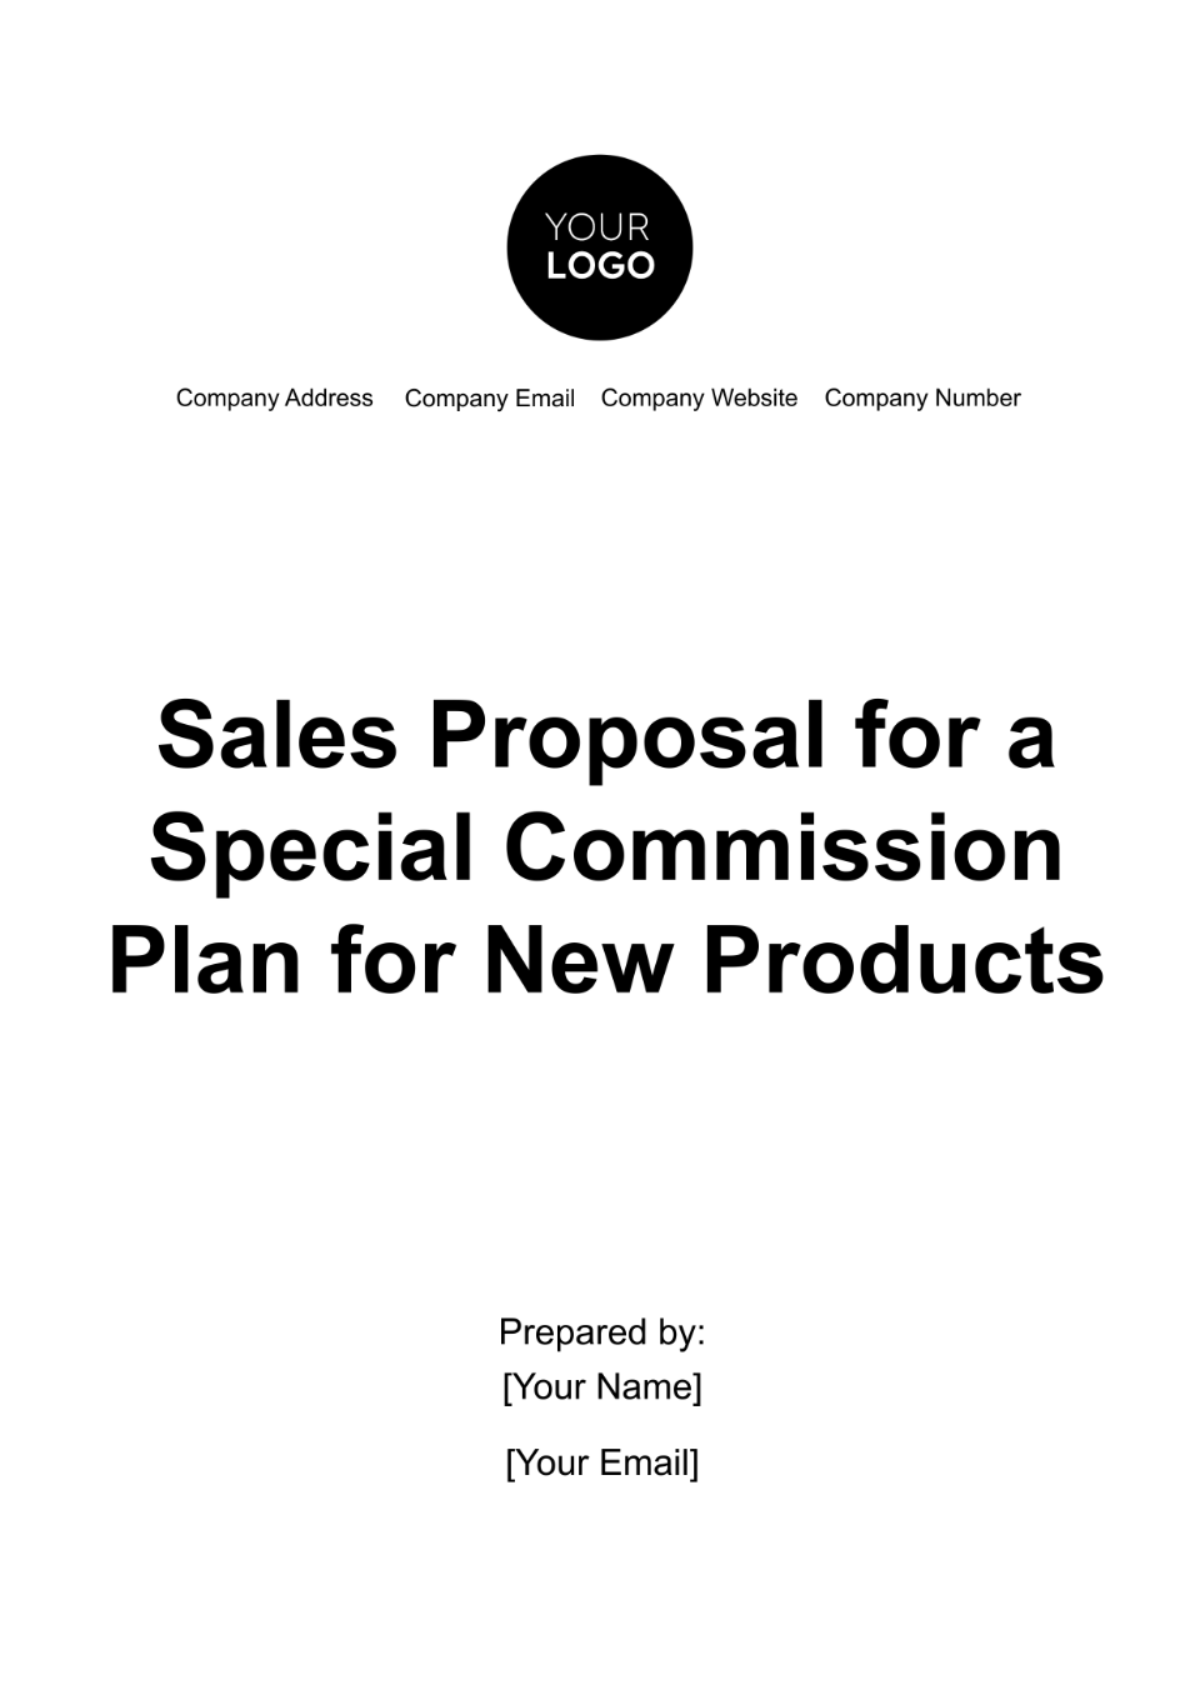 Free Sales Proposal for a Special Commission Plan for New Products Template